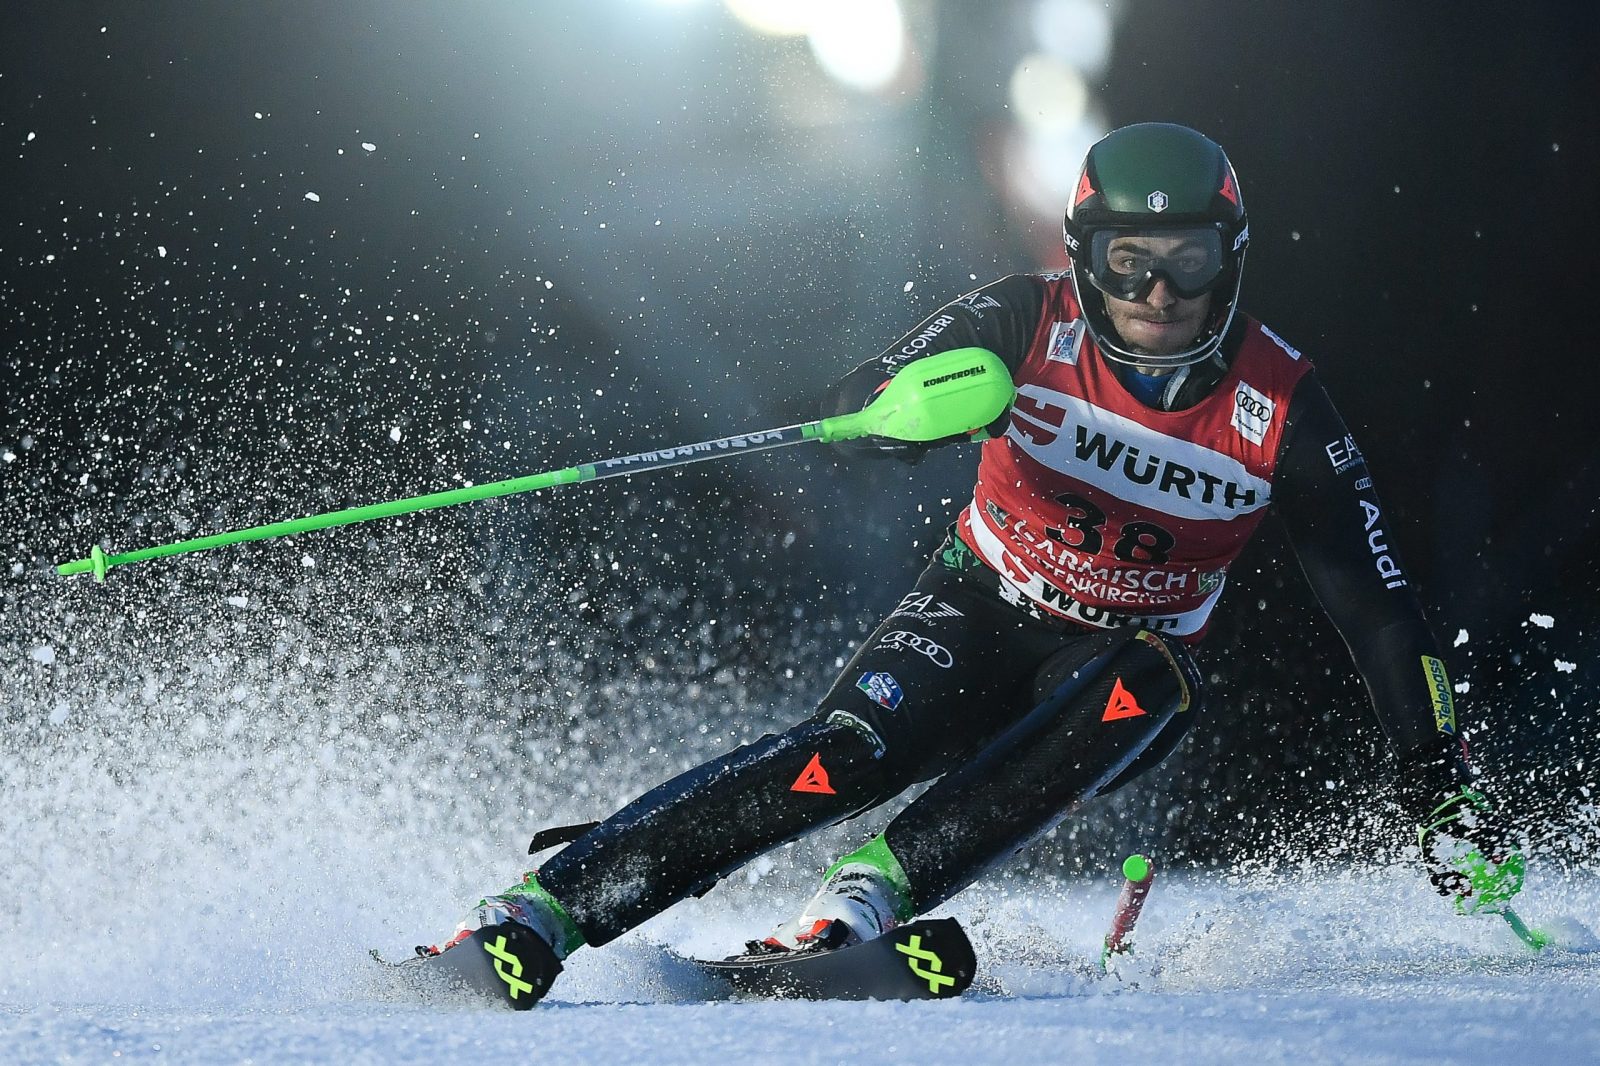 epa10389188 Stefano Gross of Italy in action during the first run of the Men's Slalom race at the FIS Alpine Skiing World Cup in Garmisch Partenkirchen, Germany, 04 January 2023.  EPA/ANNA SZILAGYI